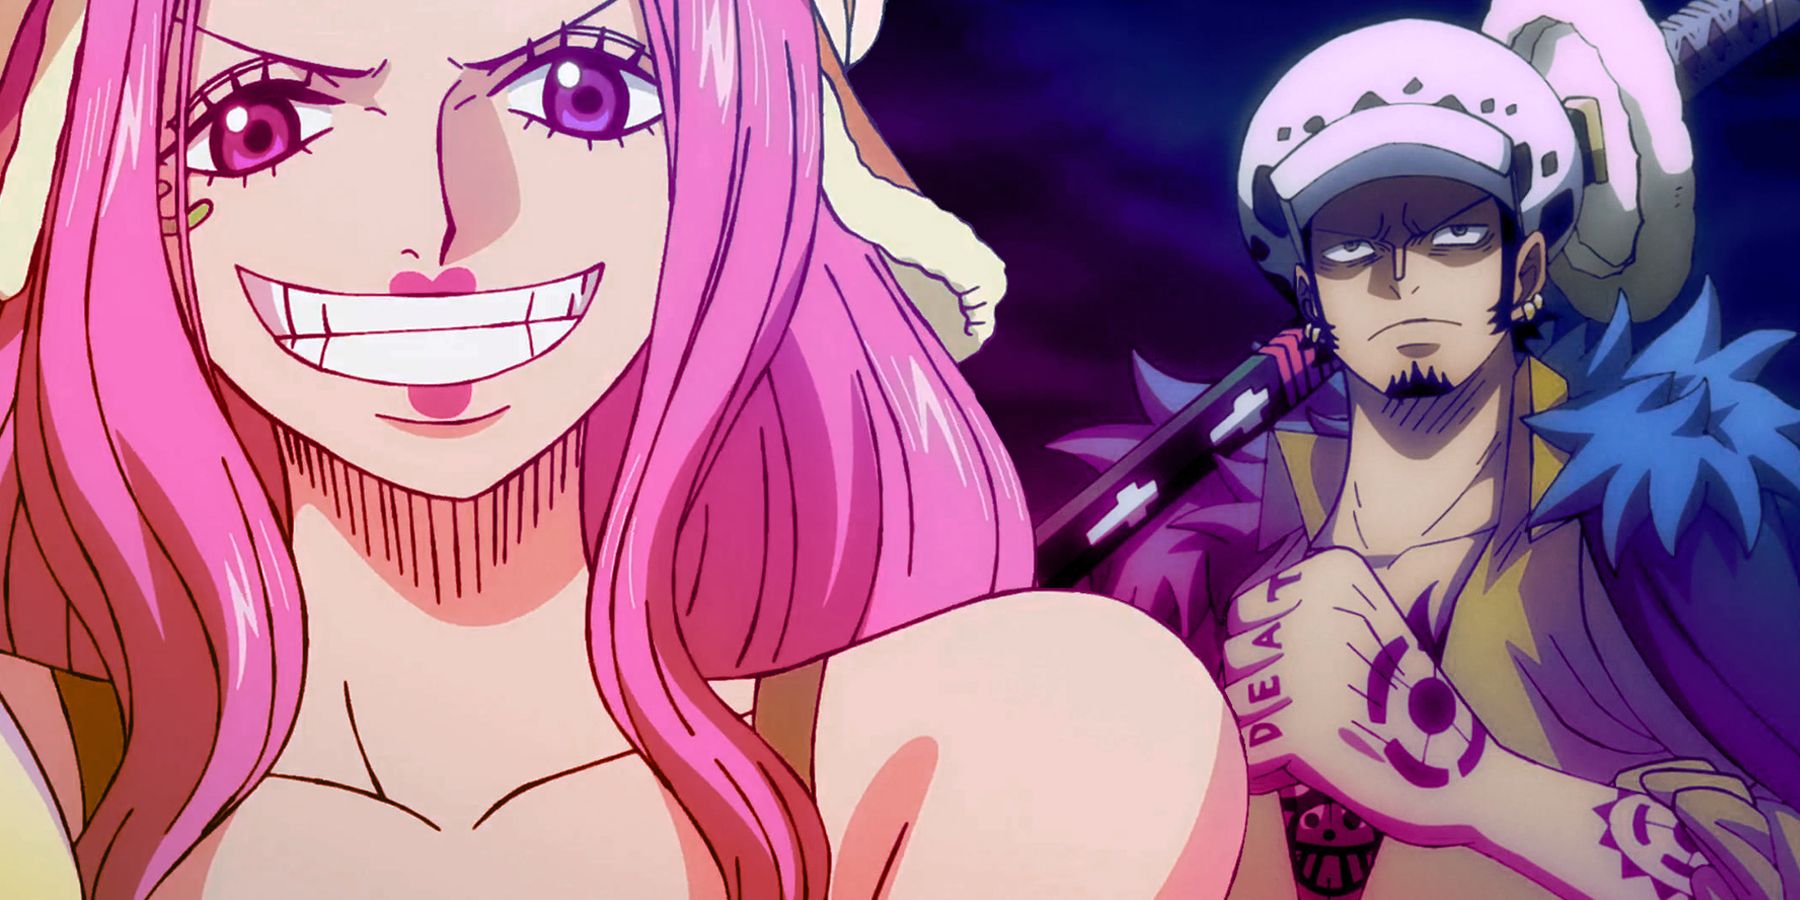 On the left, Jewelry Bonney smiles confidently. On the right, Trafalgar D. Law looks up with determination.